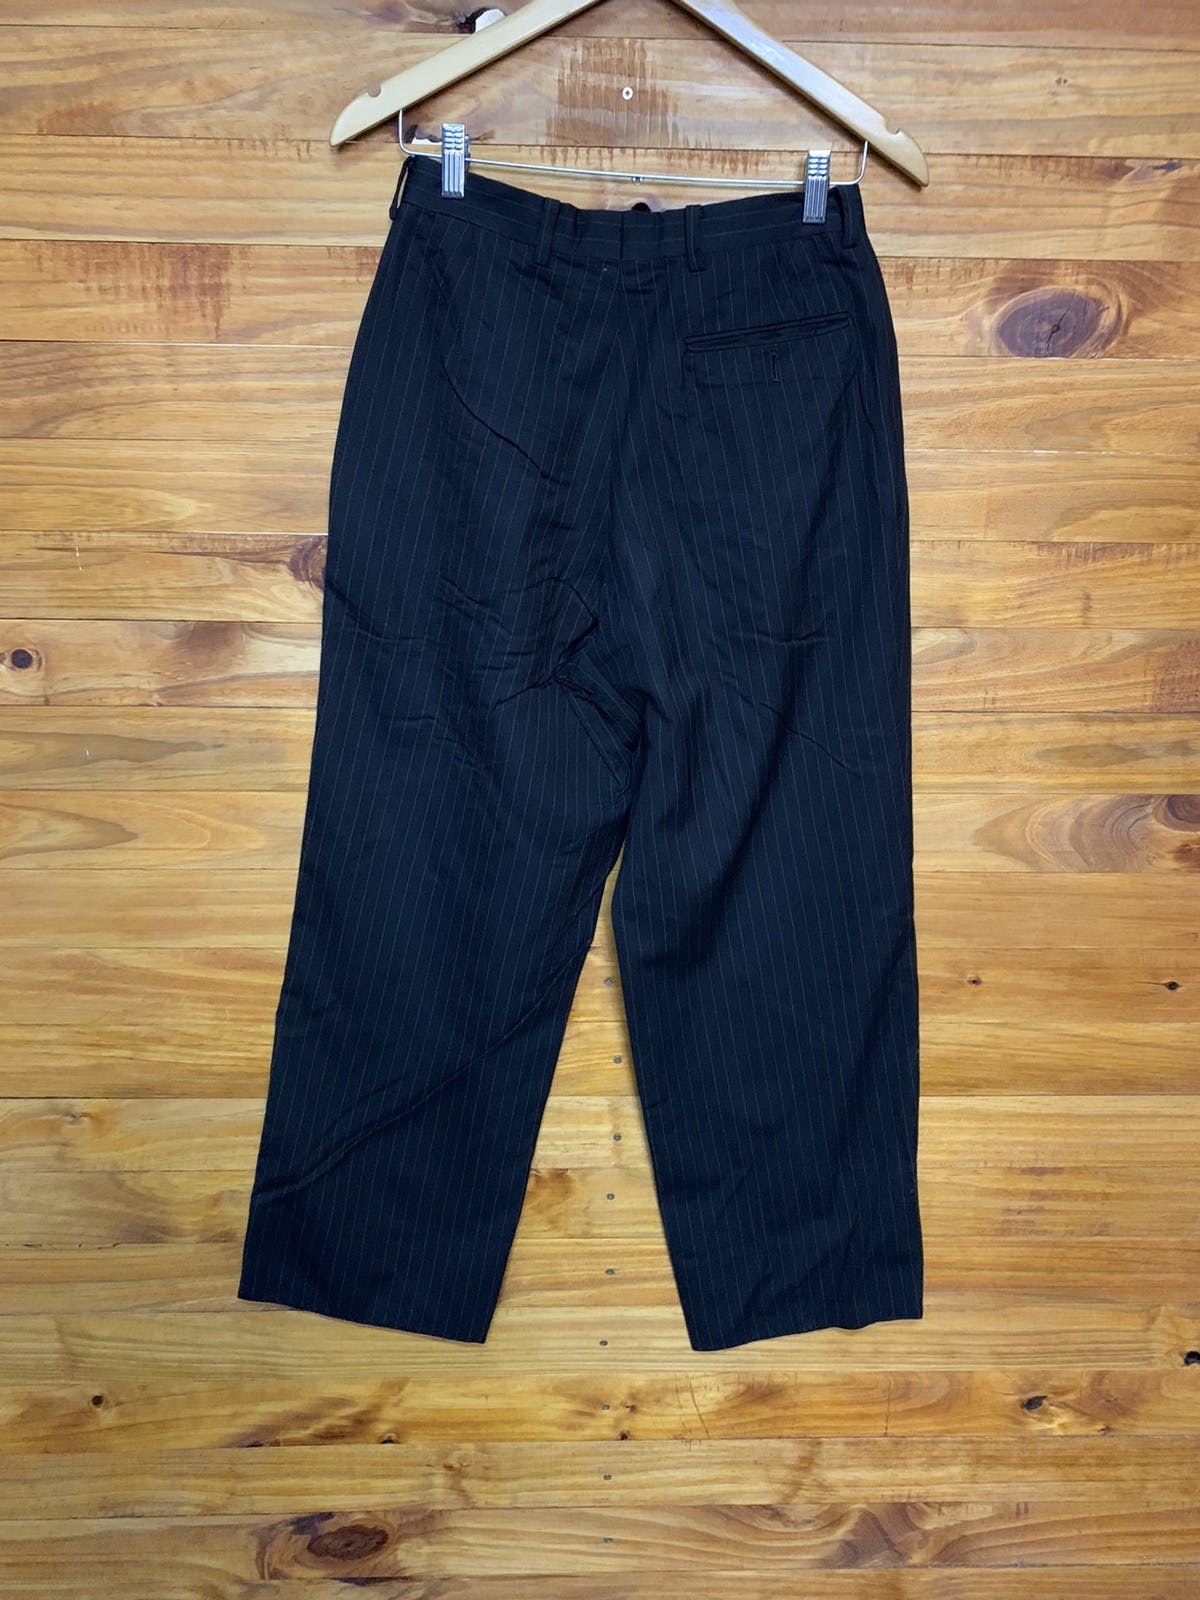 Vintage Moschino Trouser Pants - 6